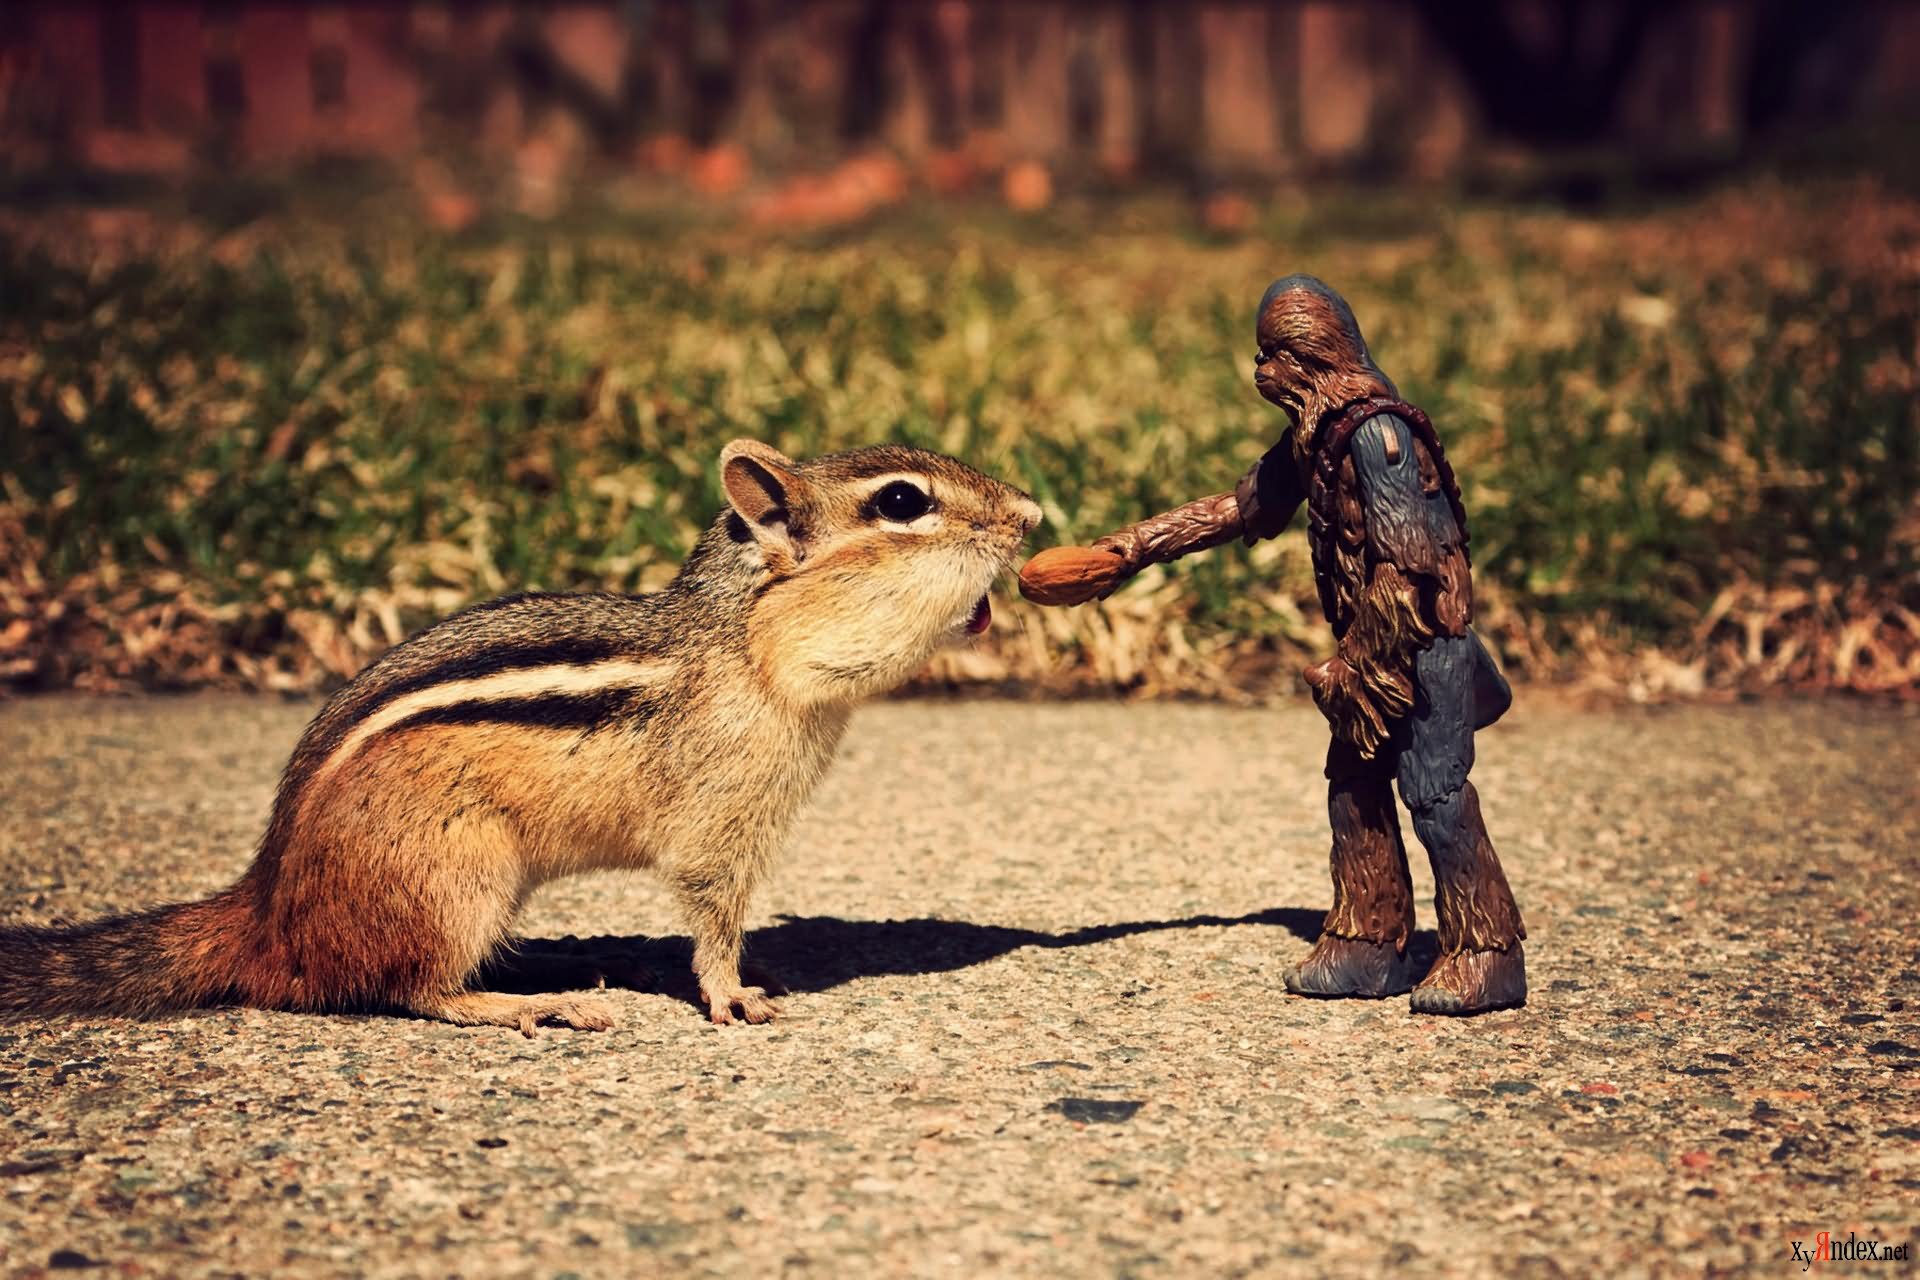 Darth Vader Giving Nuts To Chipmunk Funny Picture